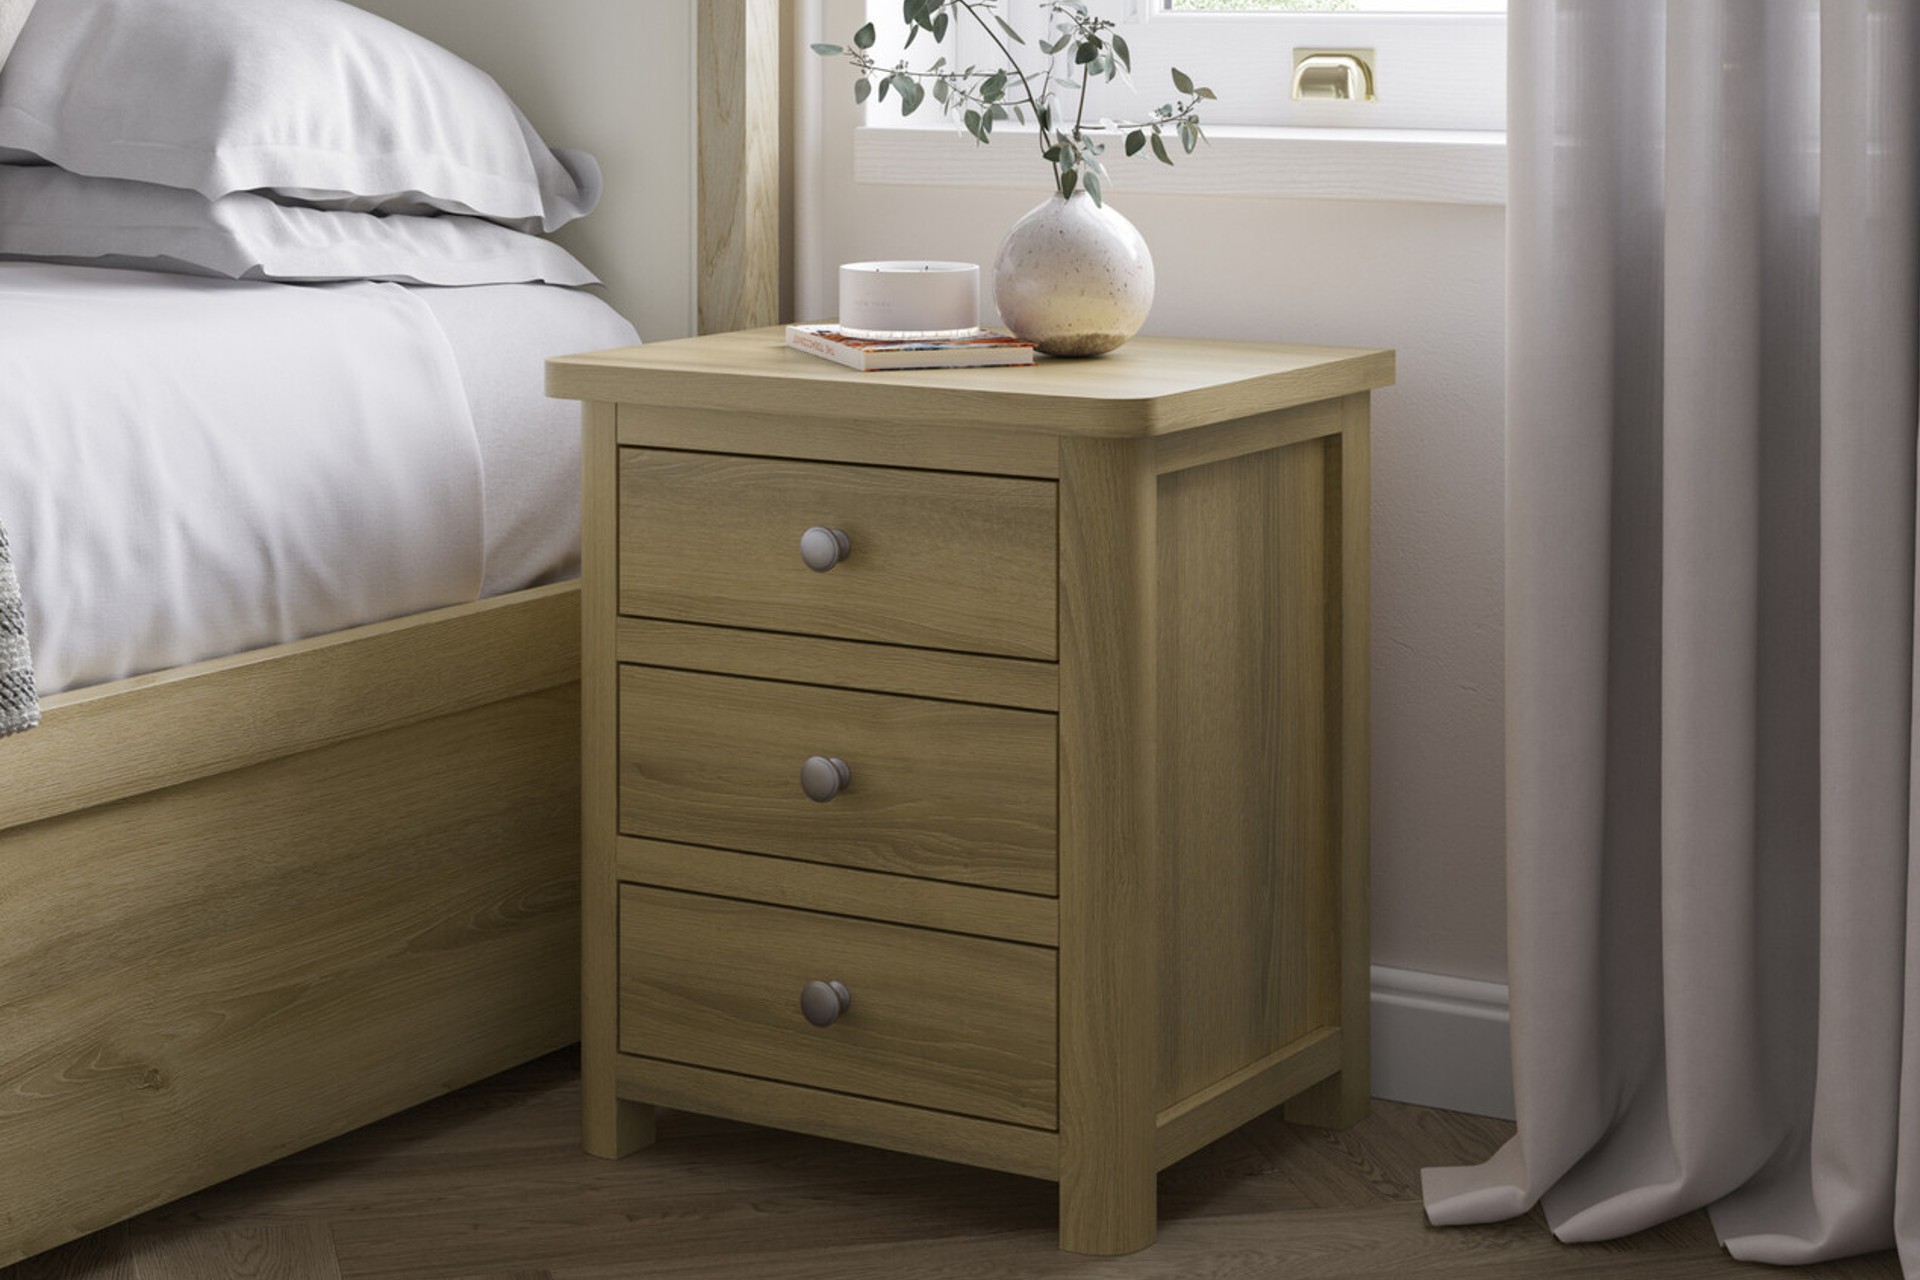 Delphine light oak 3 drawer bedside table with round silver handles pictured next to a matching oak bedframe